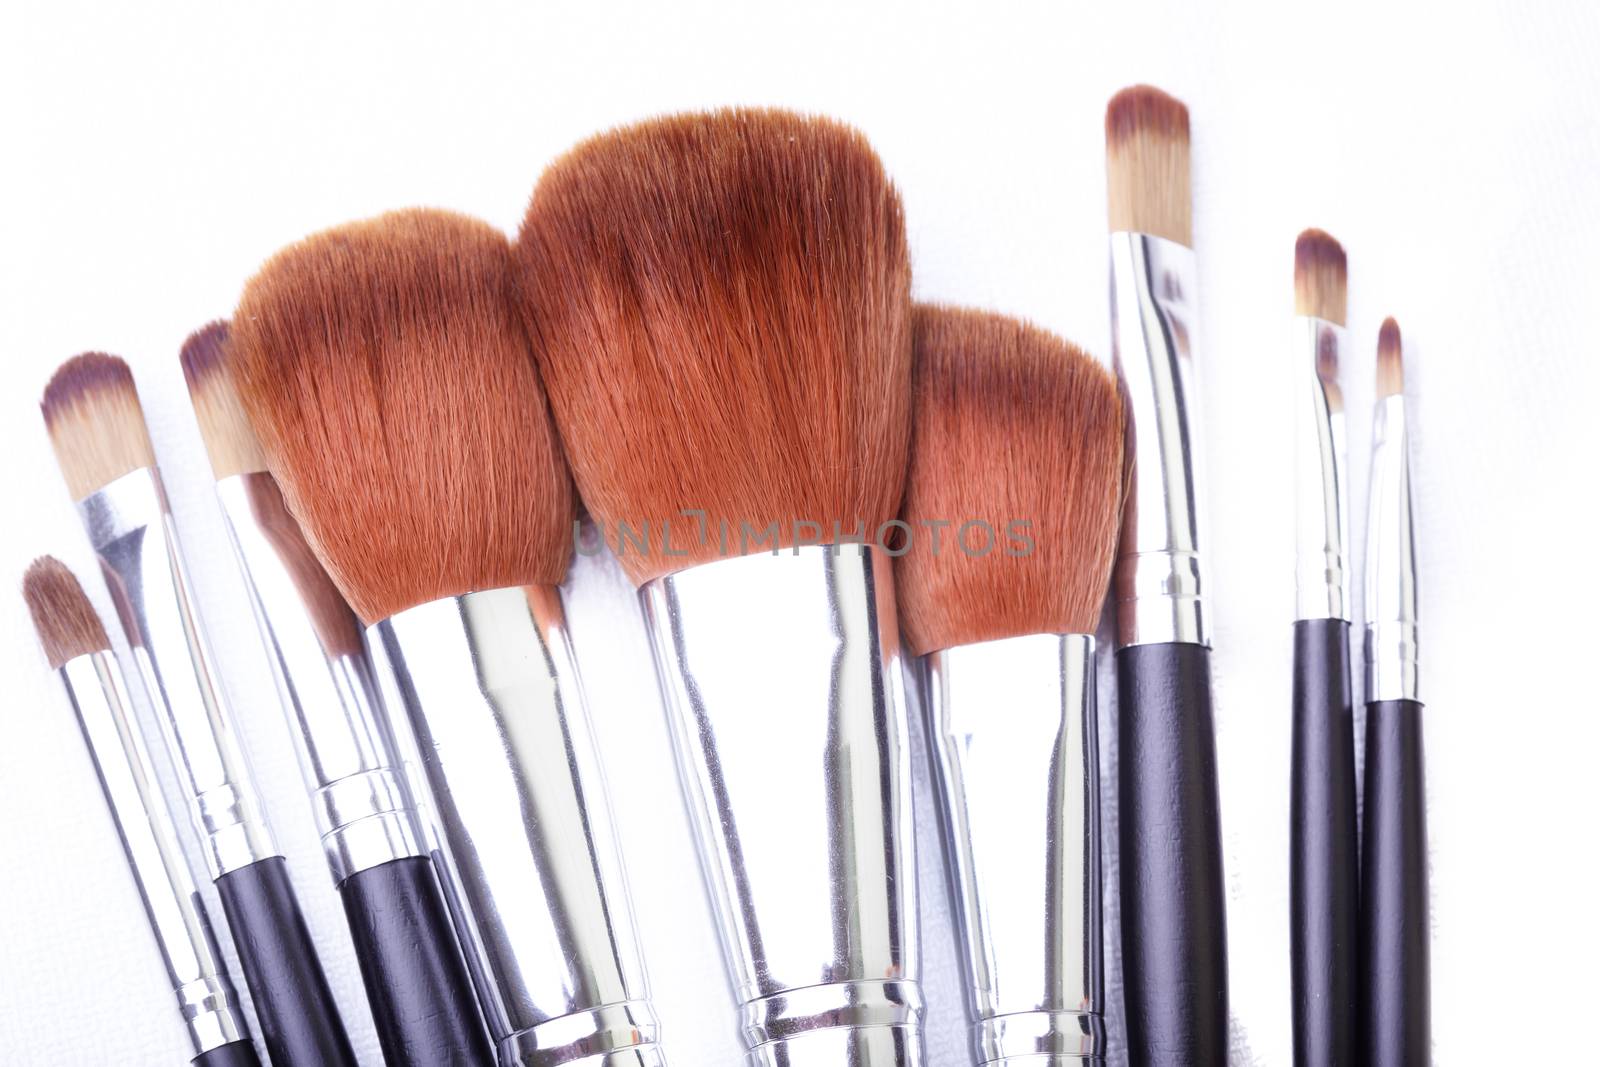 Makeup brushes by Novic